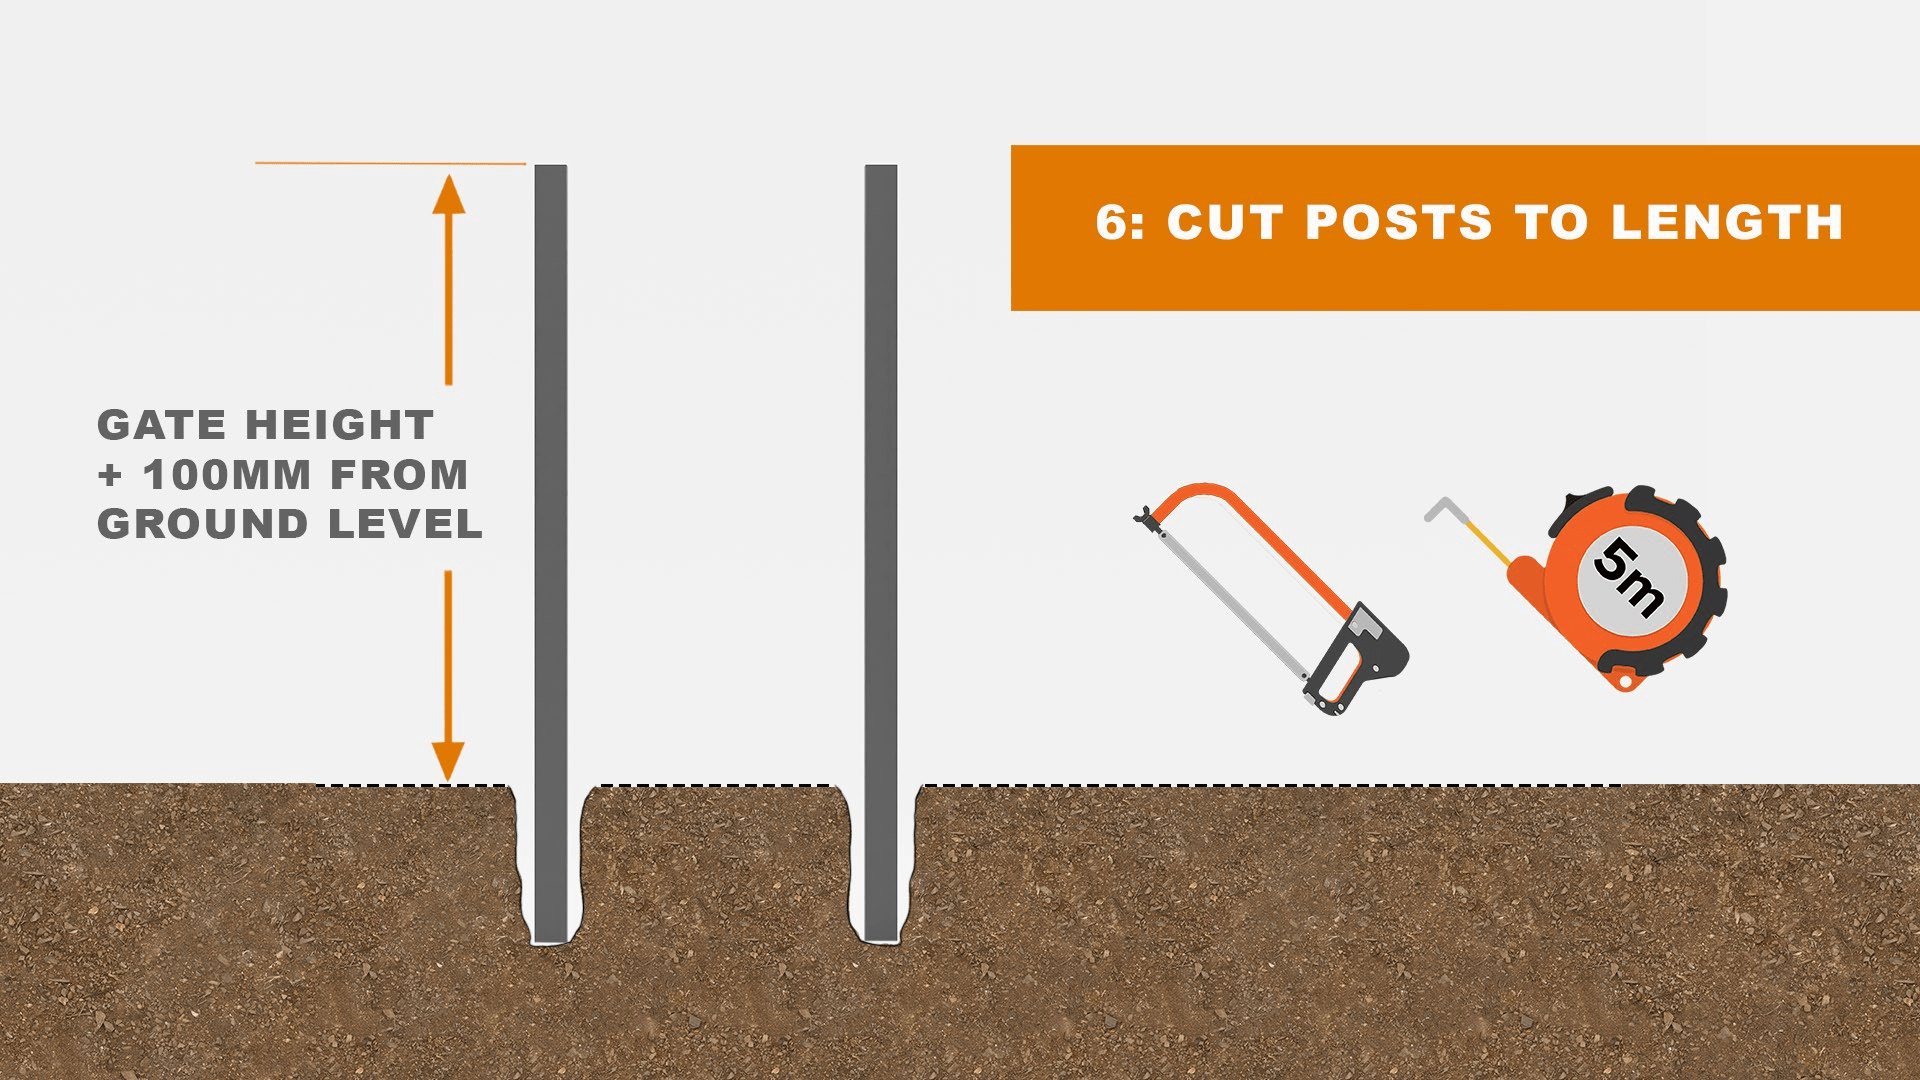 Cutting posts to length